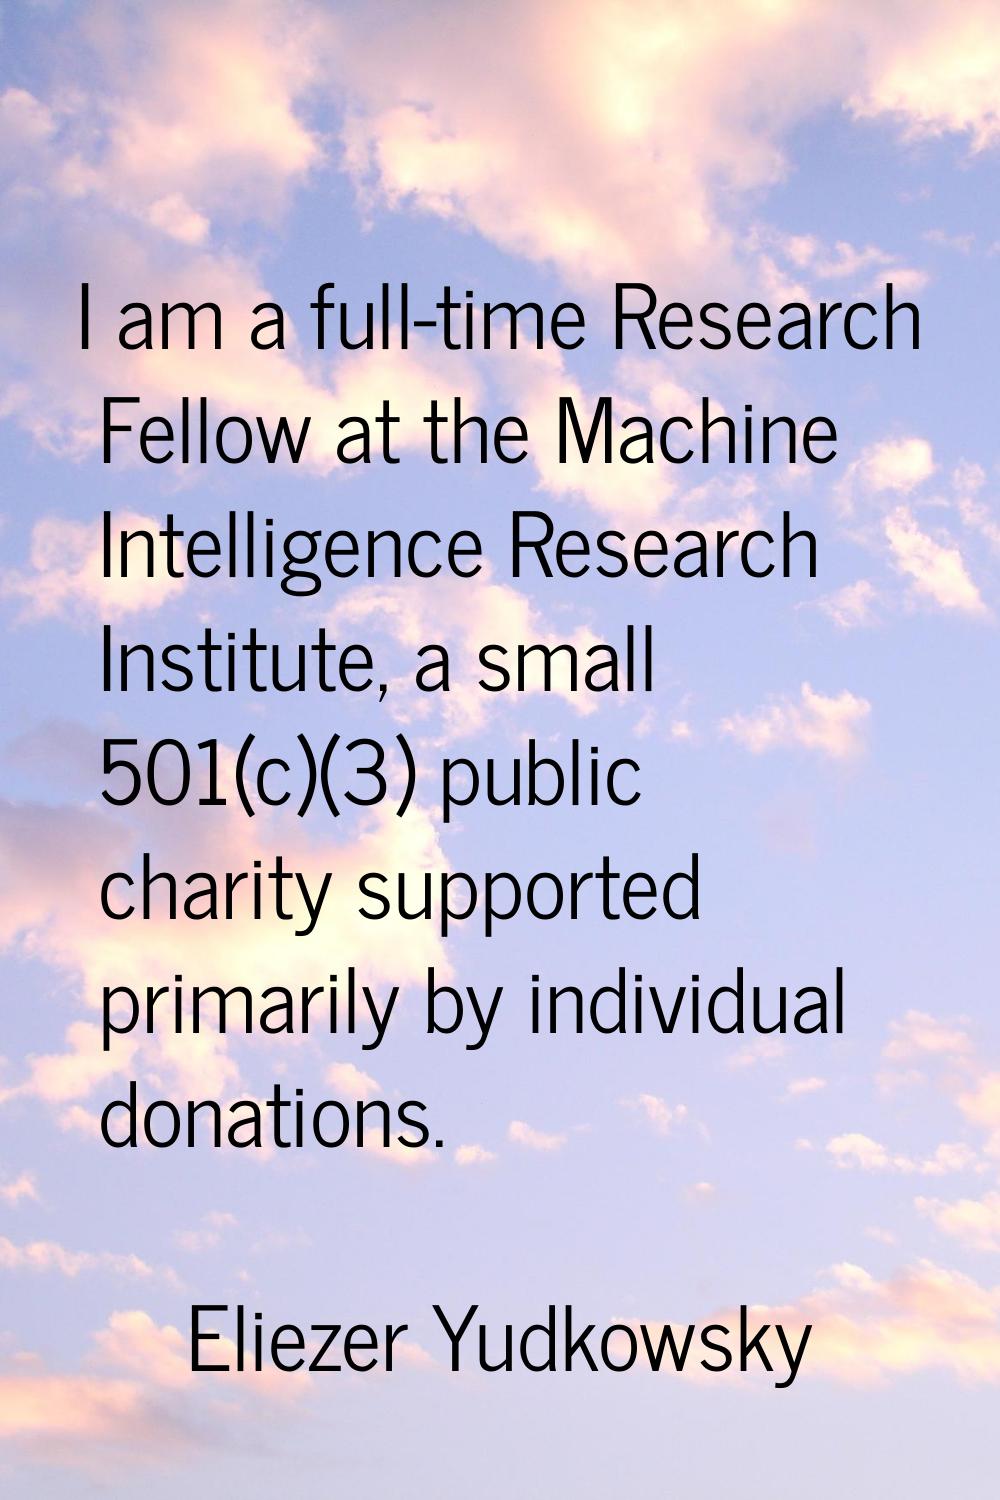 I am a full-time Research Fellow at the Machine Intelligence Research Institute, a small 501(c)(3) 